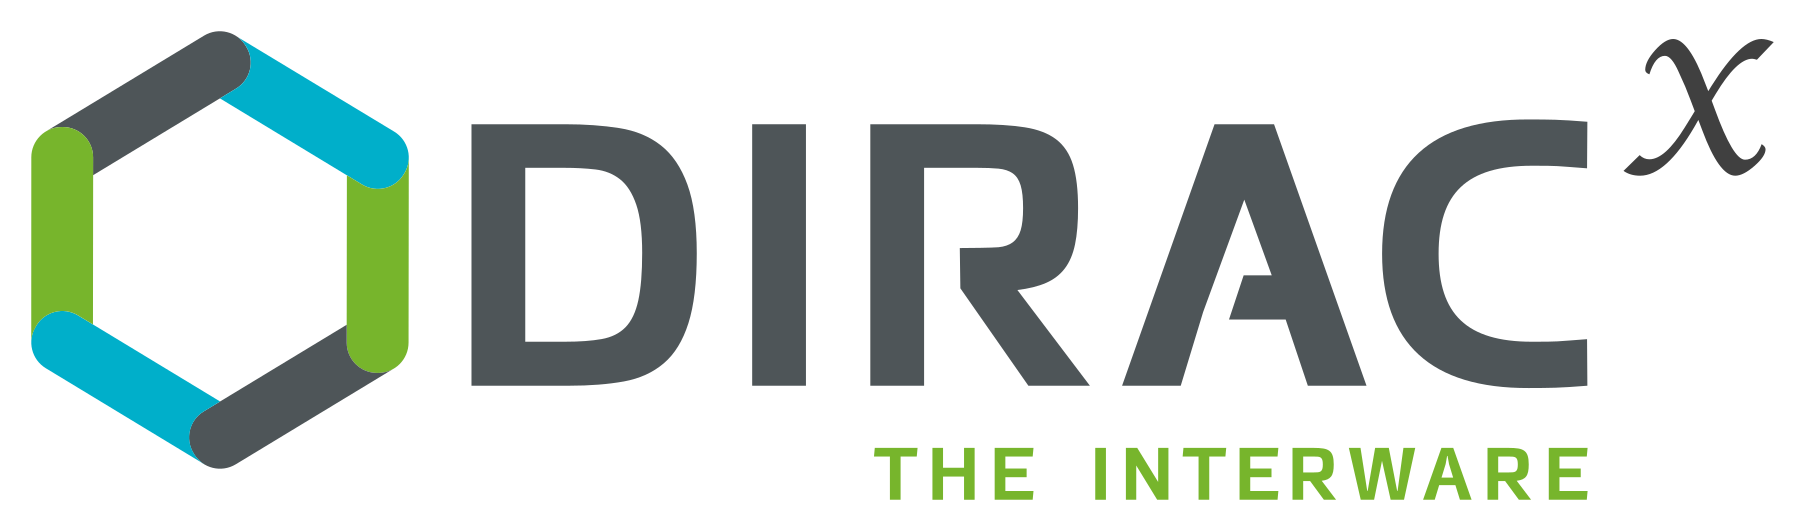 diracx-logo-full-high-res-transparent-background.png